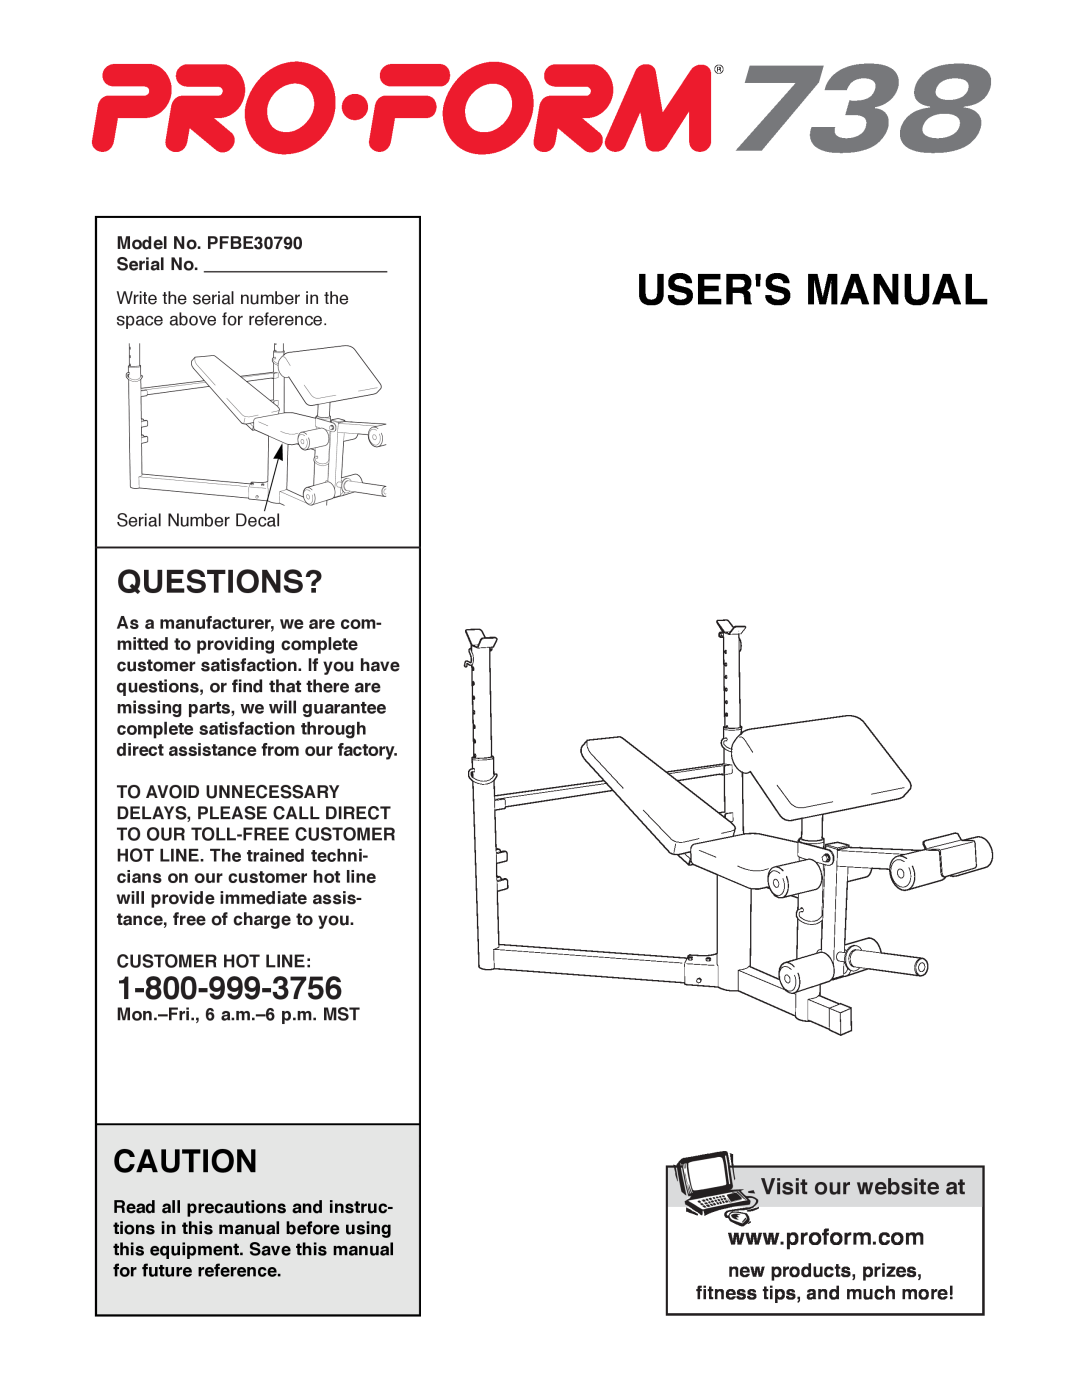 ProForm PFBE30790 user manual Questions?, Users Manual, Visit our website at 